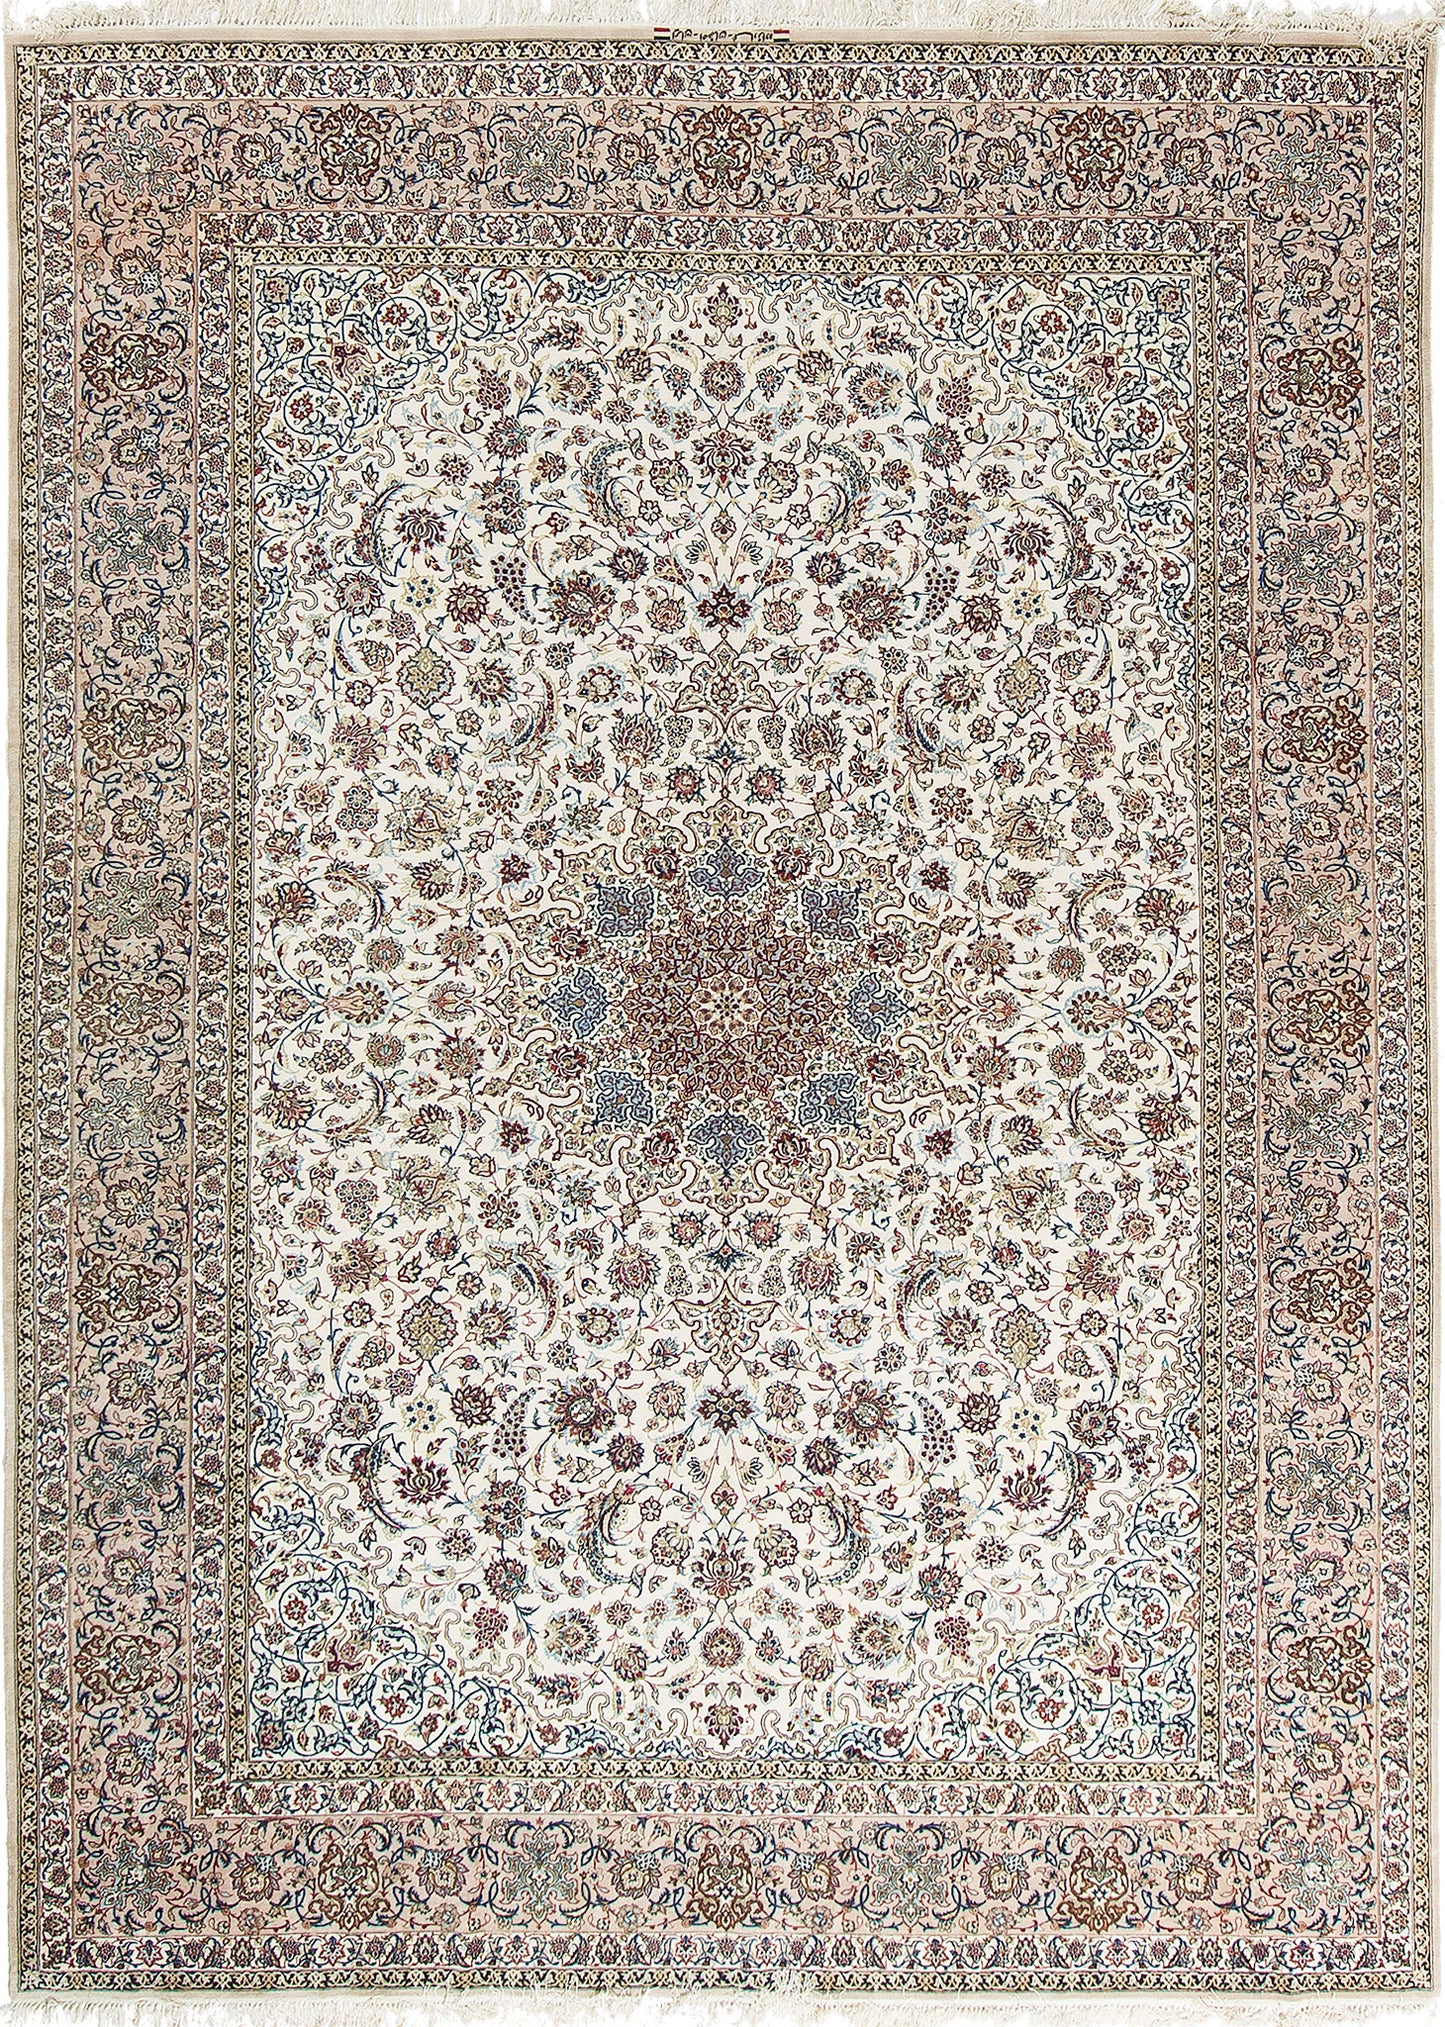 Persian Rug 2557 Fine Persian Isfahan Rug Weave by Emadzadeh 26893